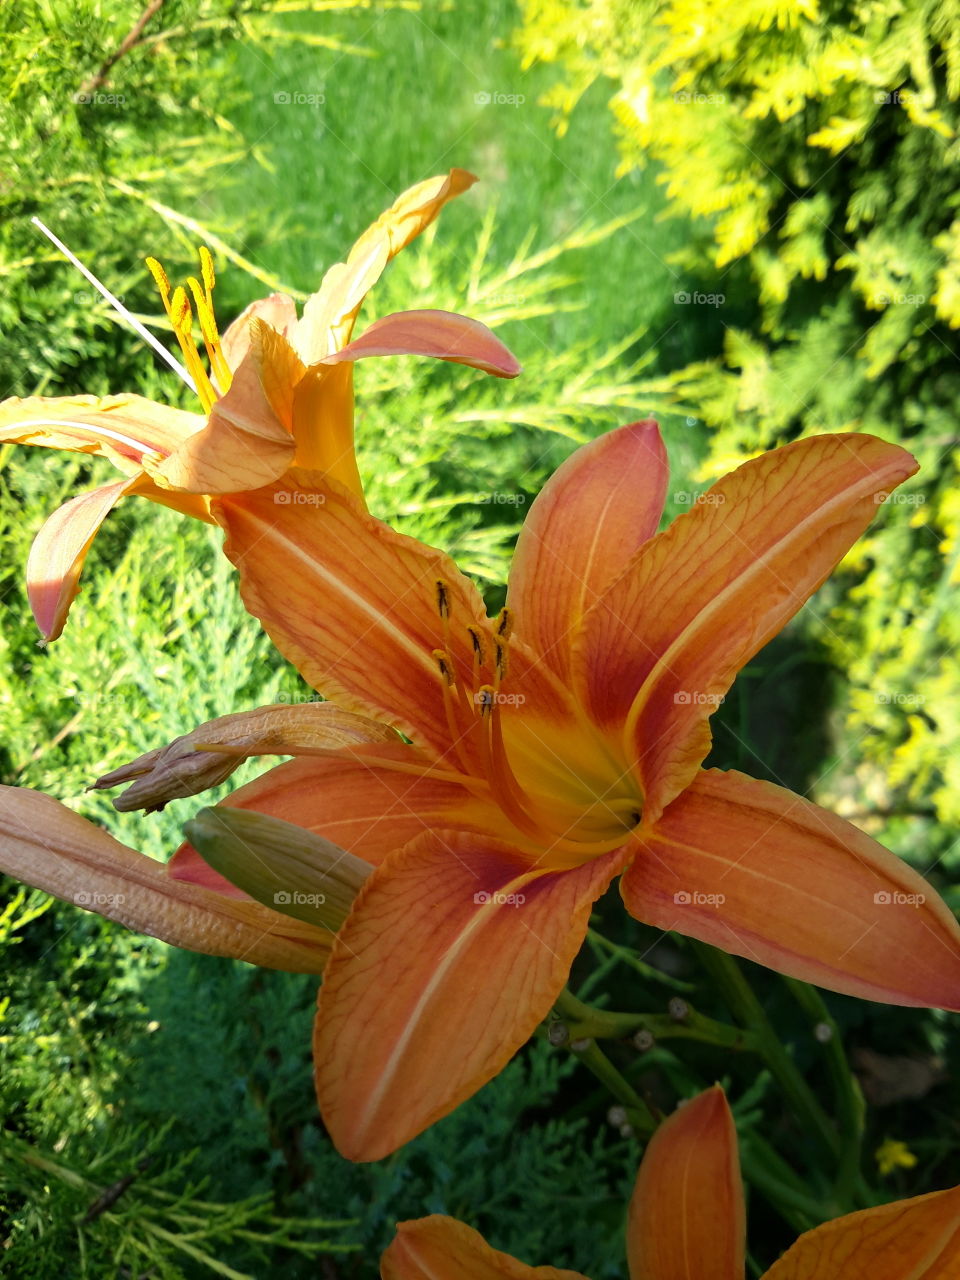 Lily in the sun